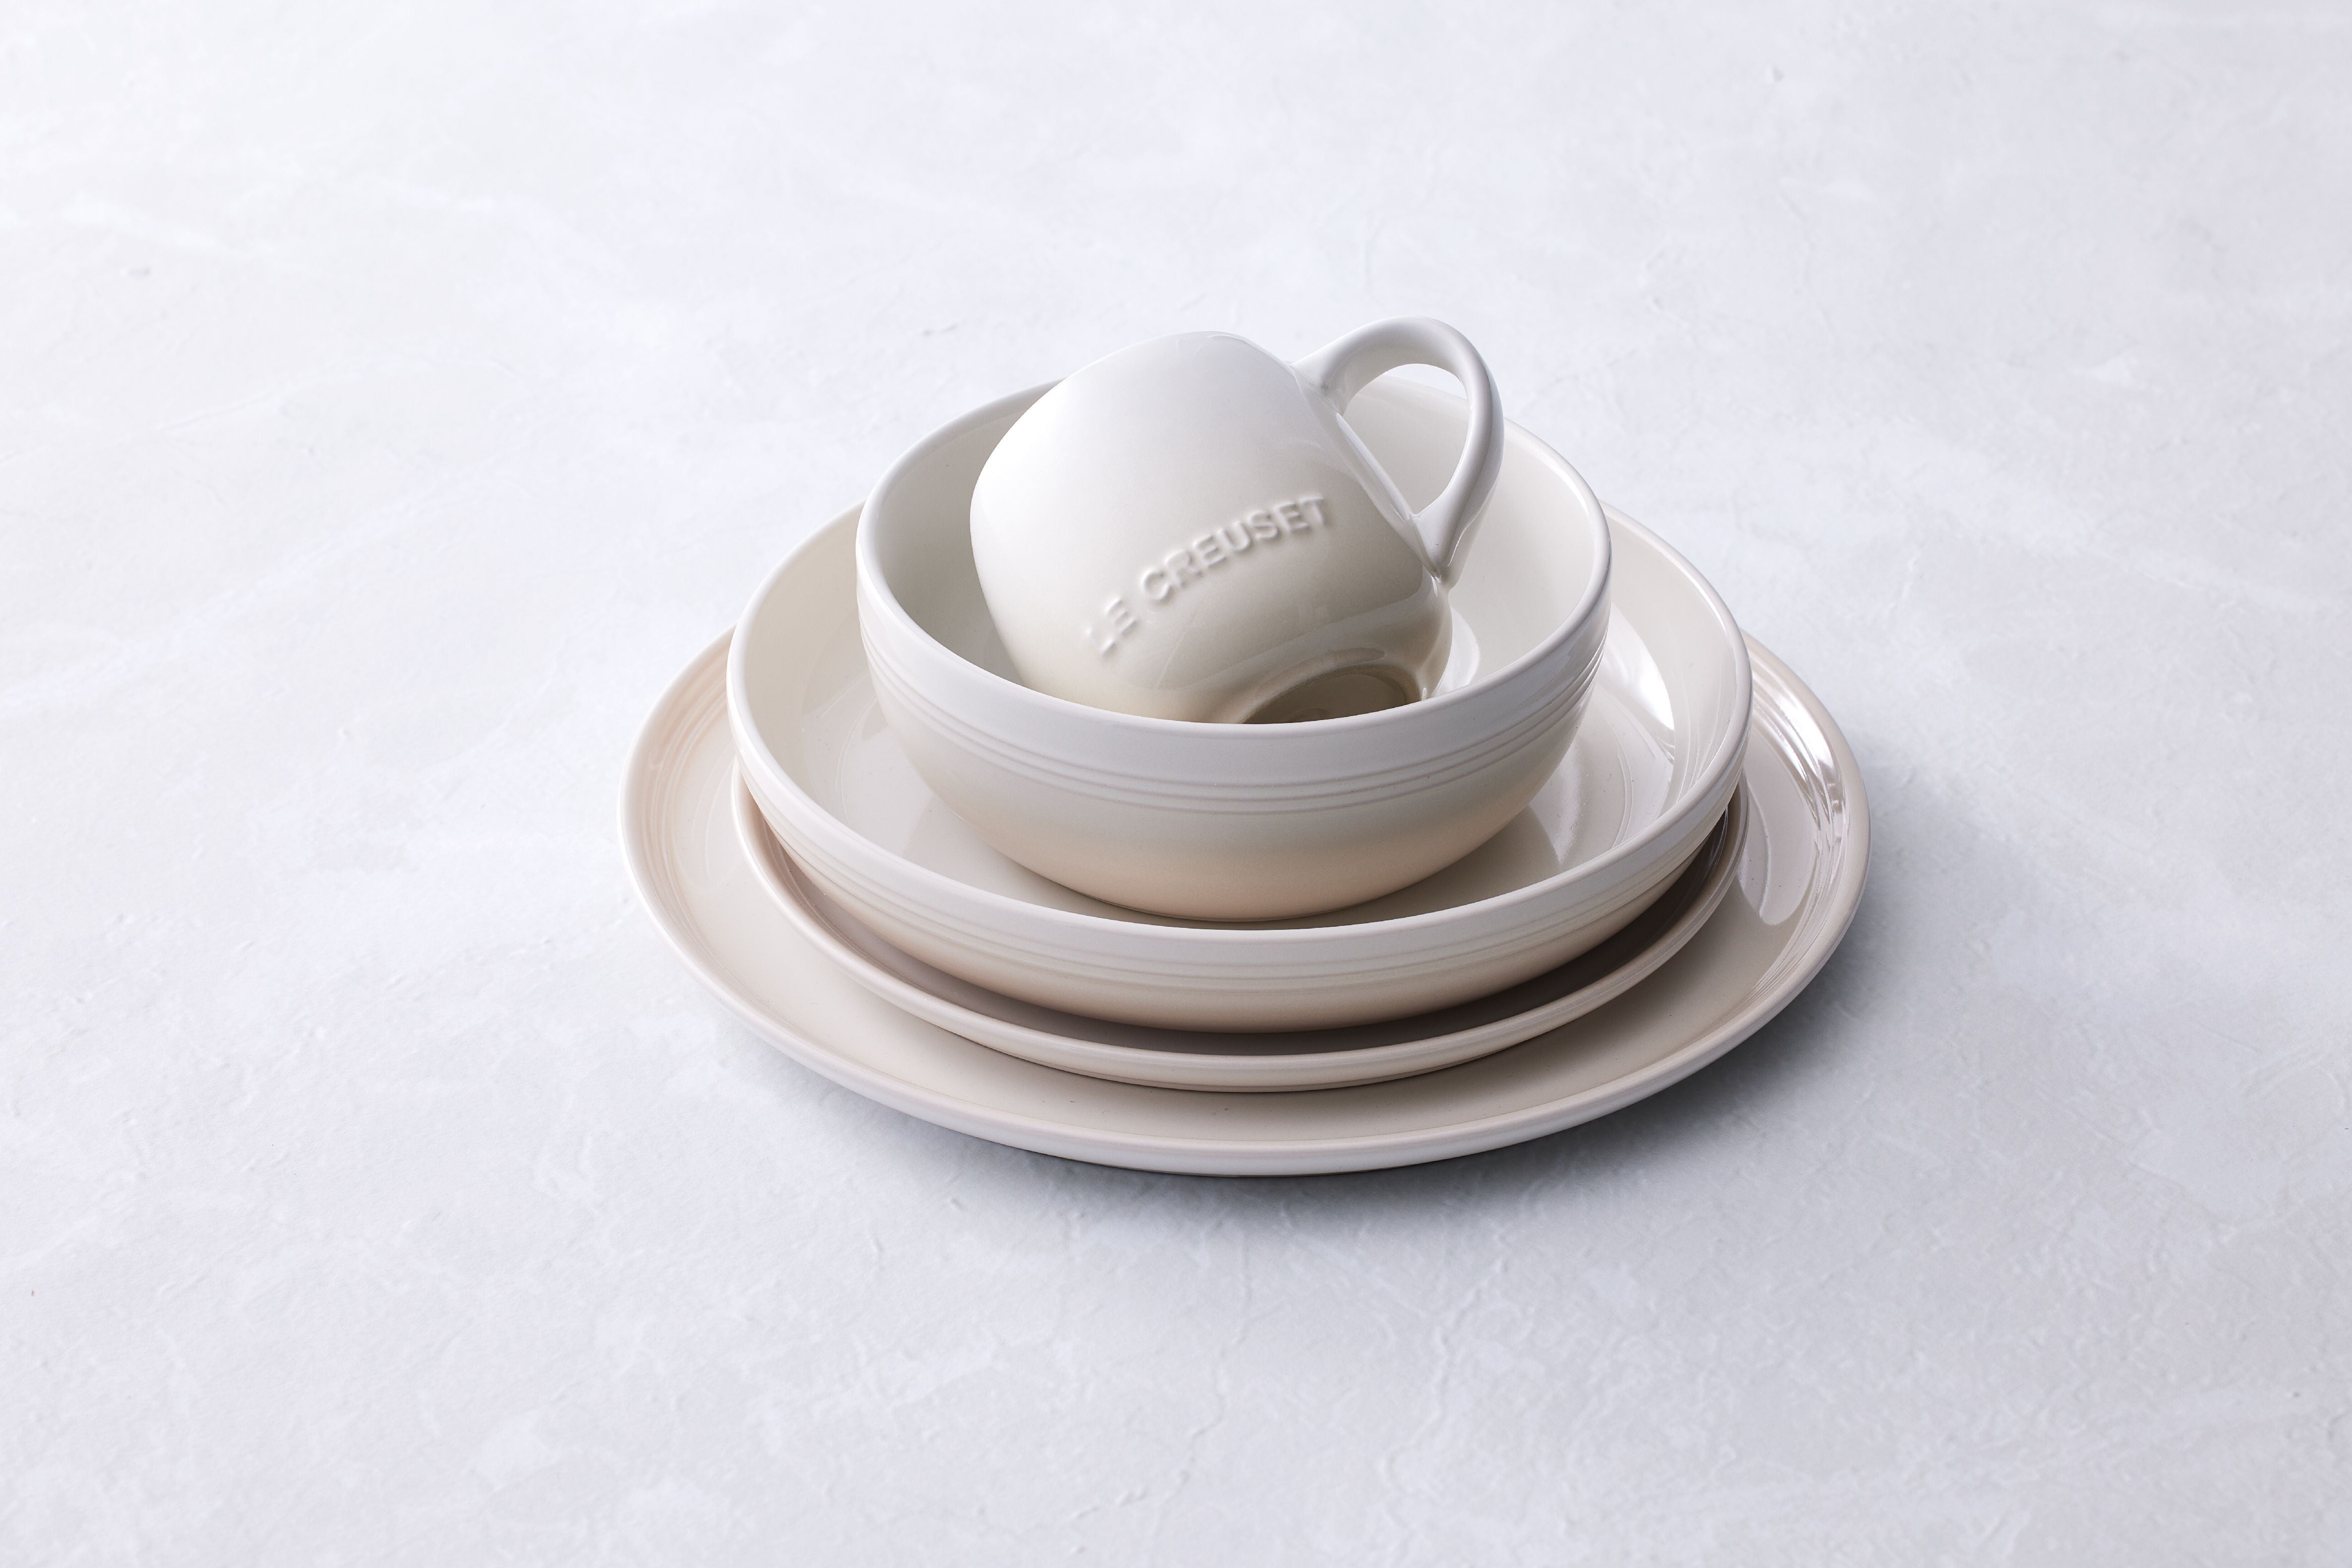 Le creuset coupe middagsplade, marengs